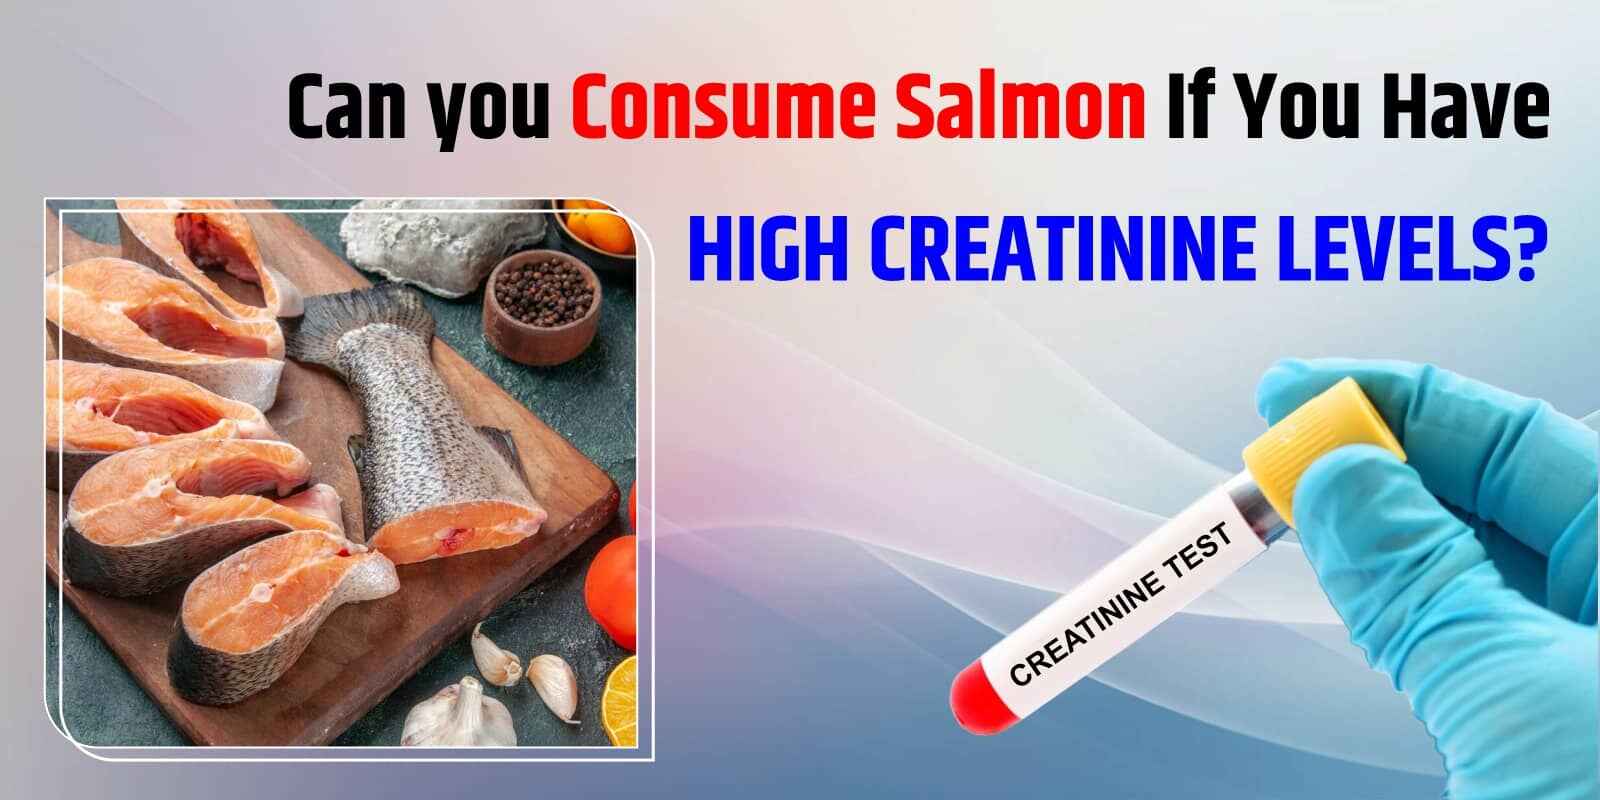 Can you Consume Salmon If You Have High Creatinine Levels?